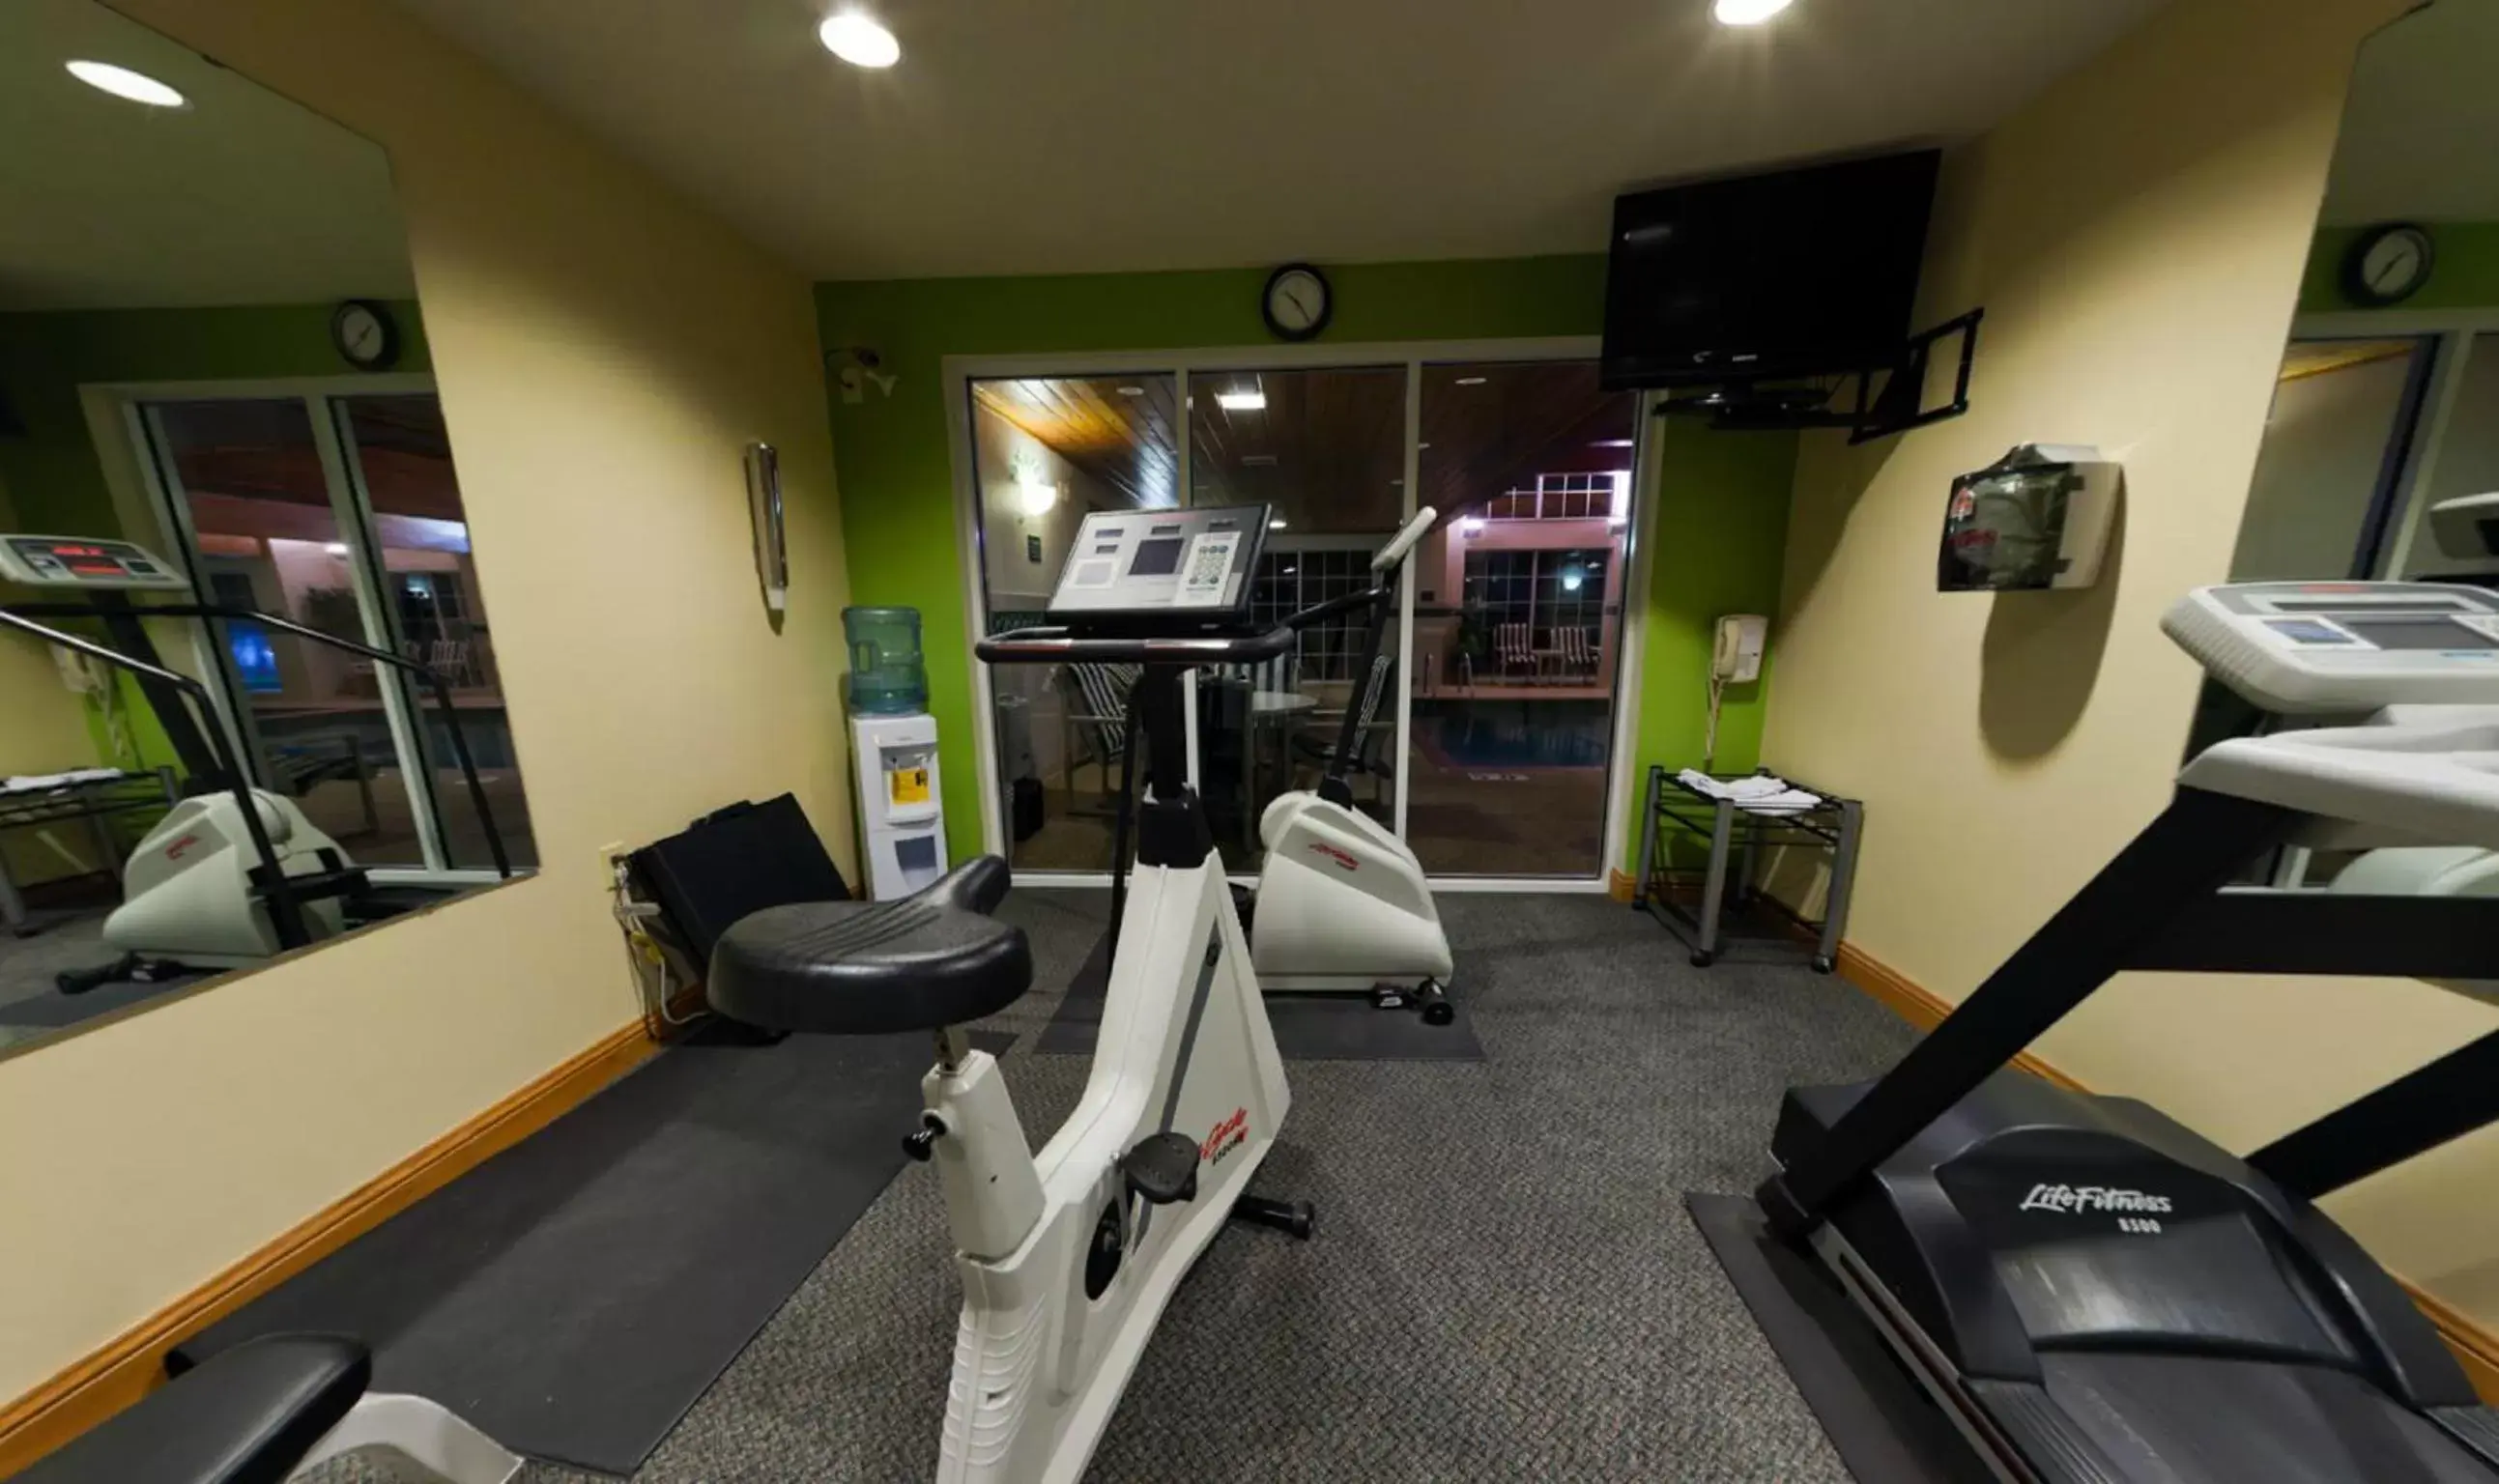 Fitness centre/facilities, Fitness Center/Facilities in Port Wisconsin Inn and Suites